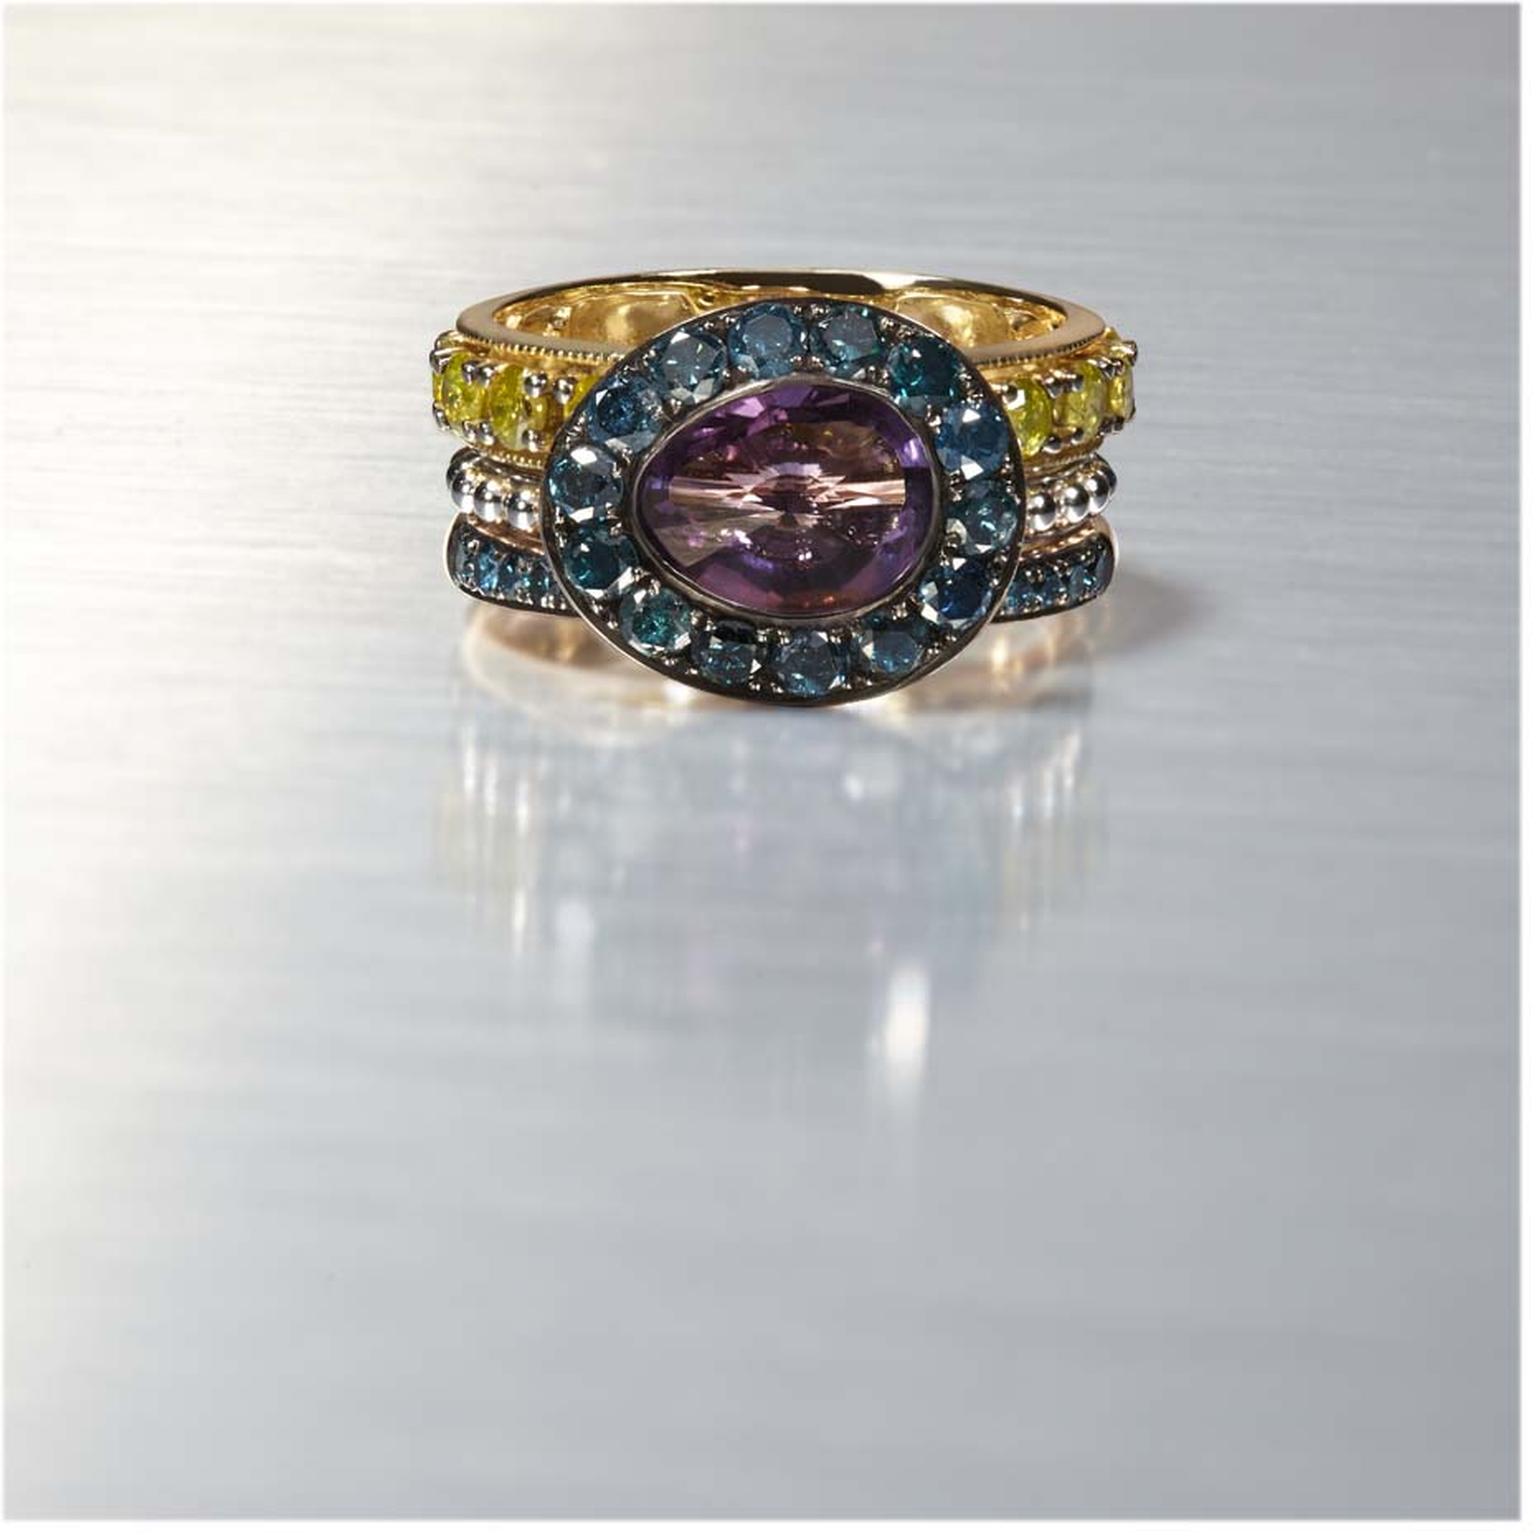 Annoushka Dusty diamond rings featuring a centre amethyst ring outlined in blue diamonds and stacked with a yellow diamond ring on top and a green diamond ring below.